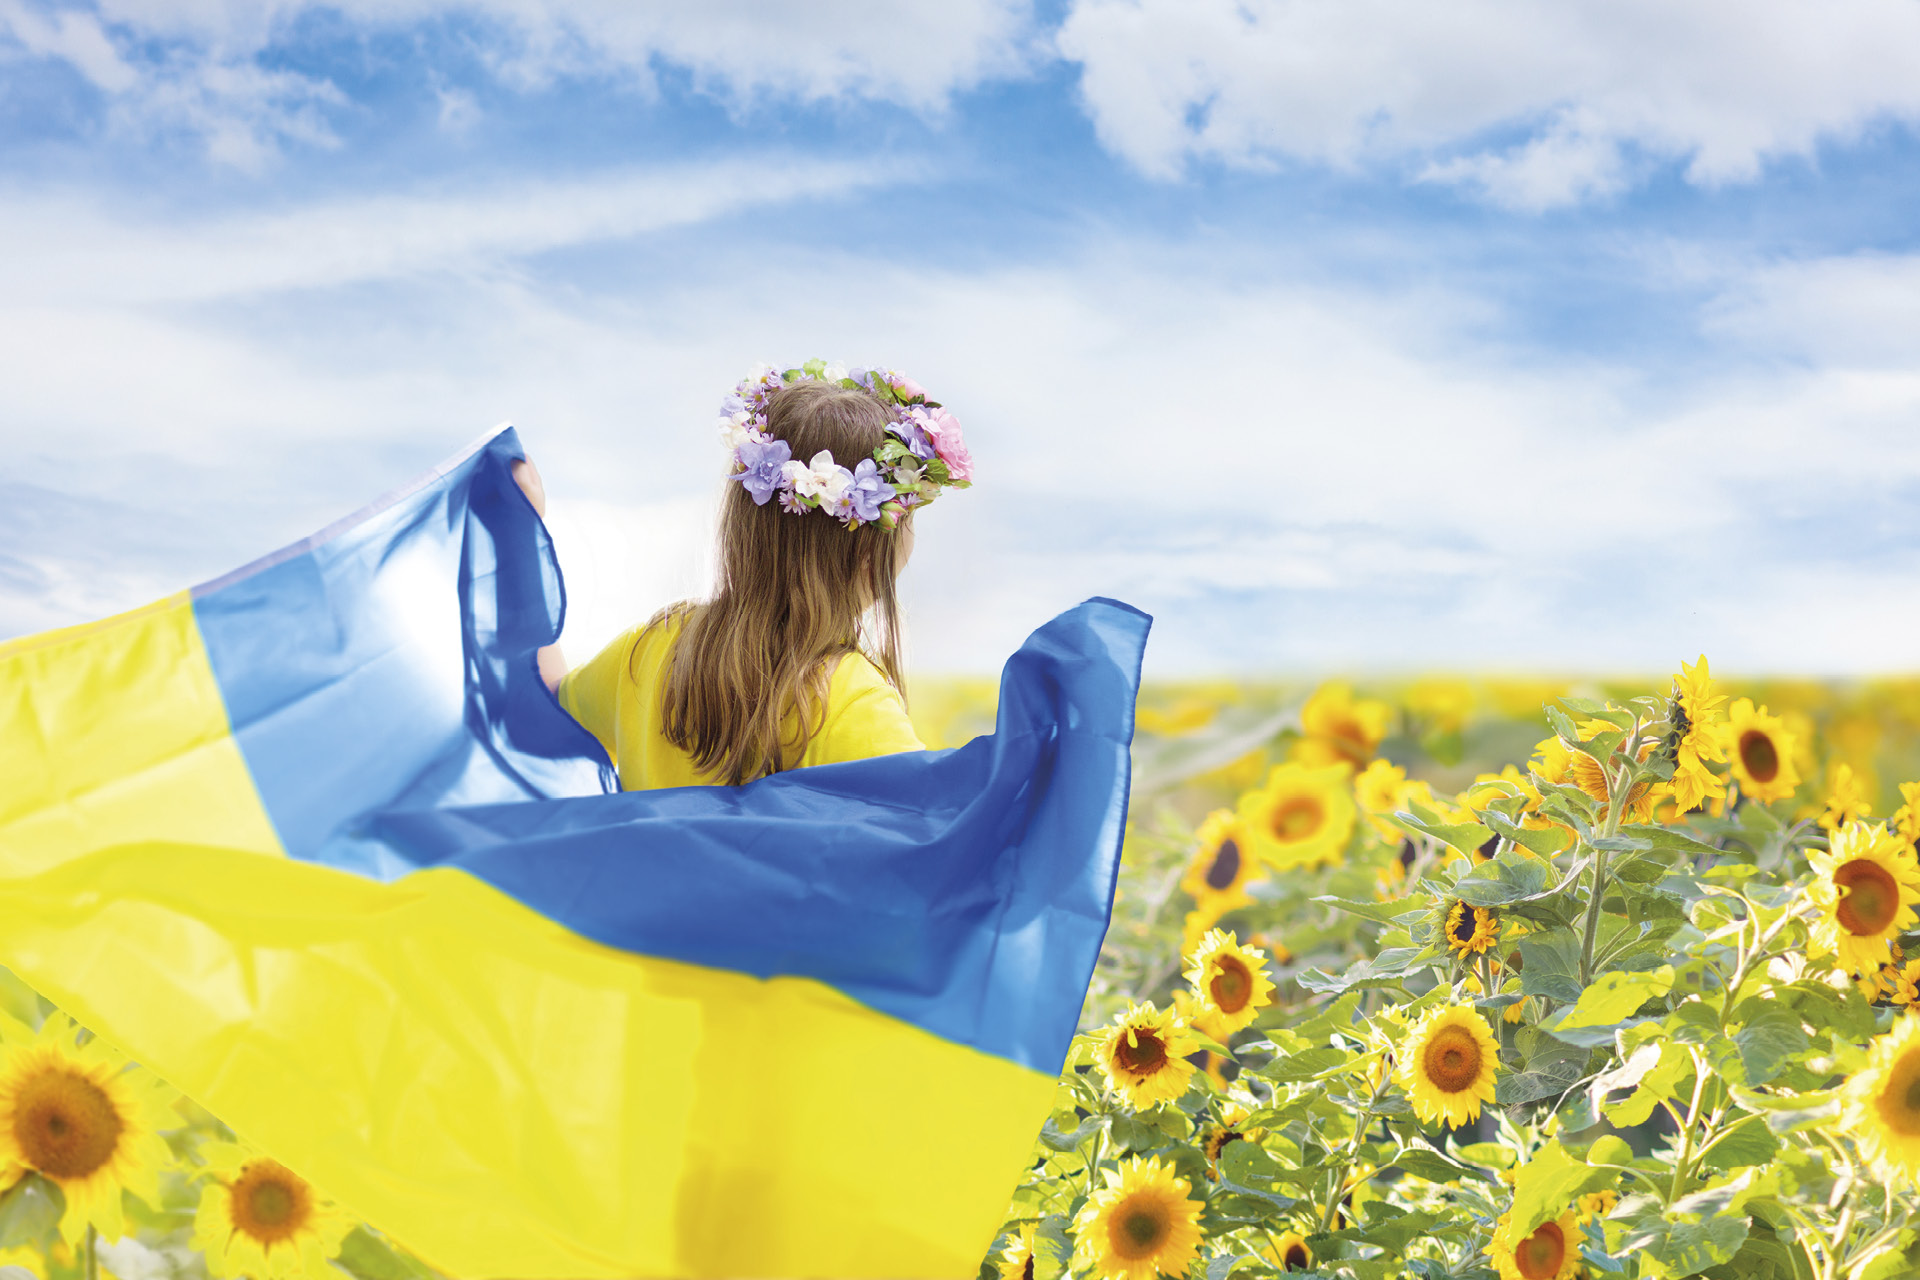 Sowing seeds of love for the people of Ukraine